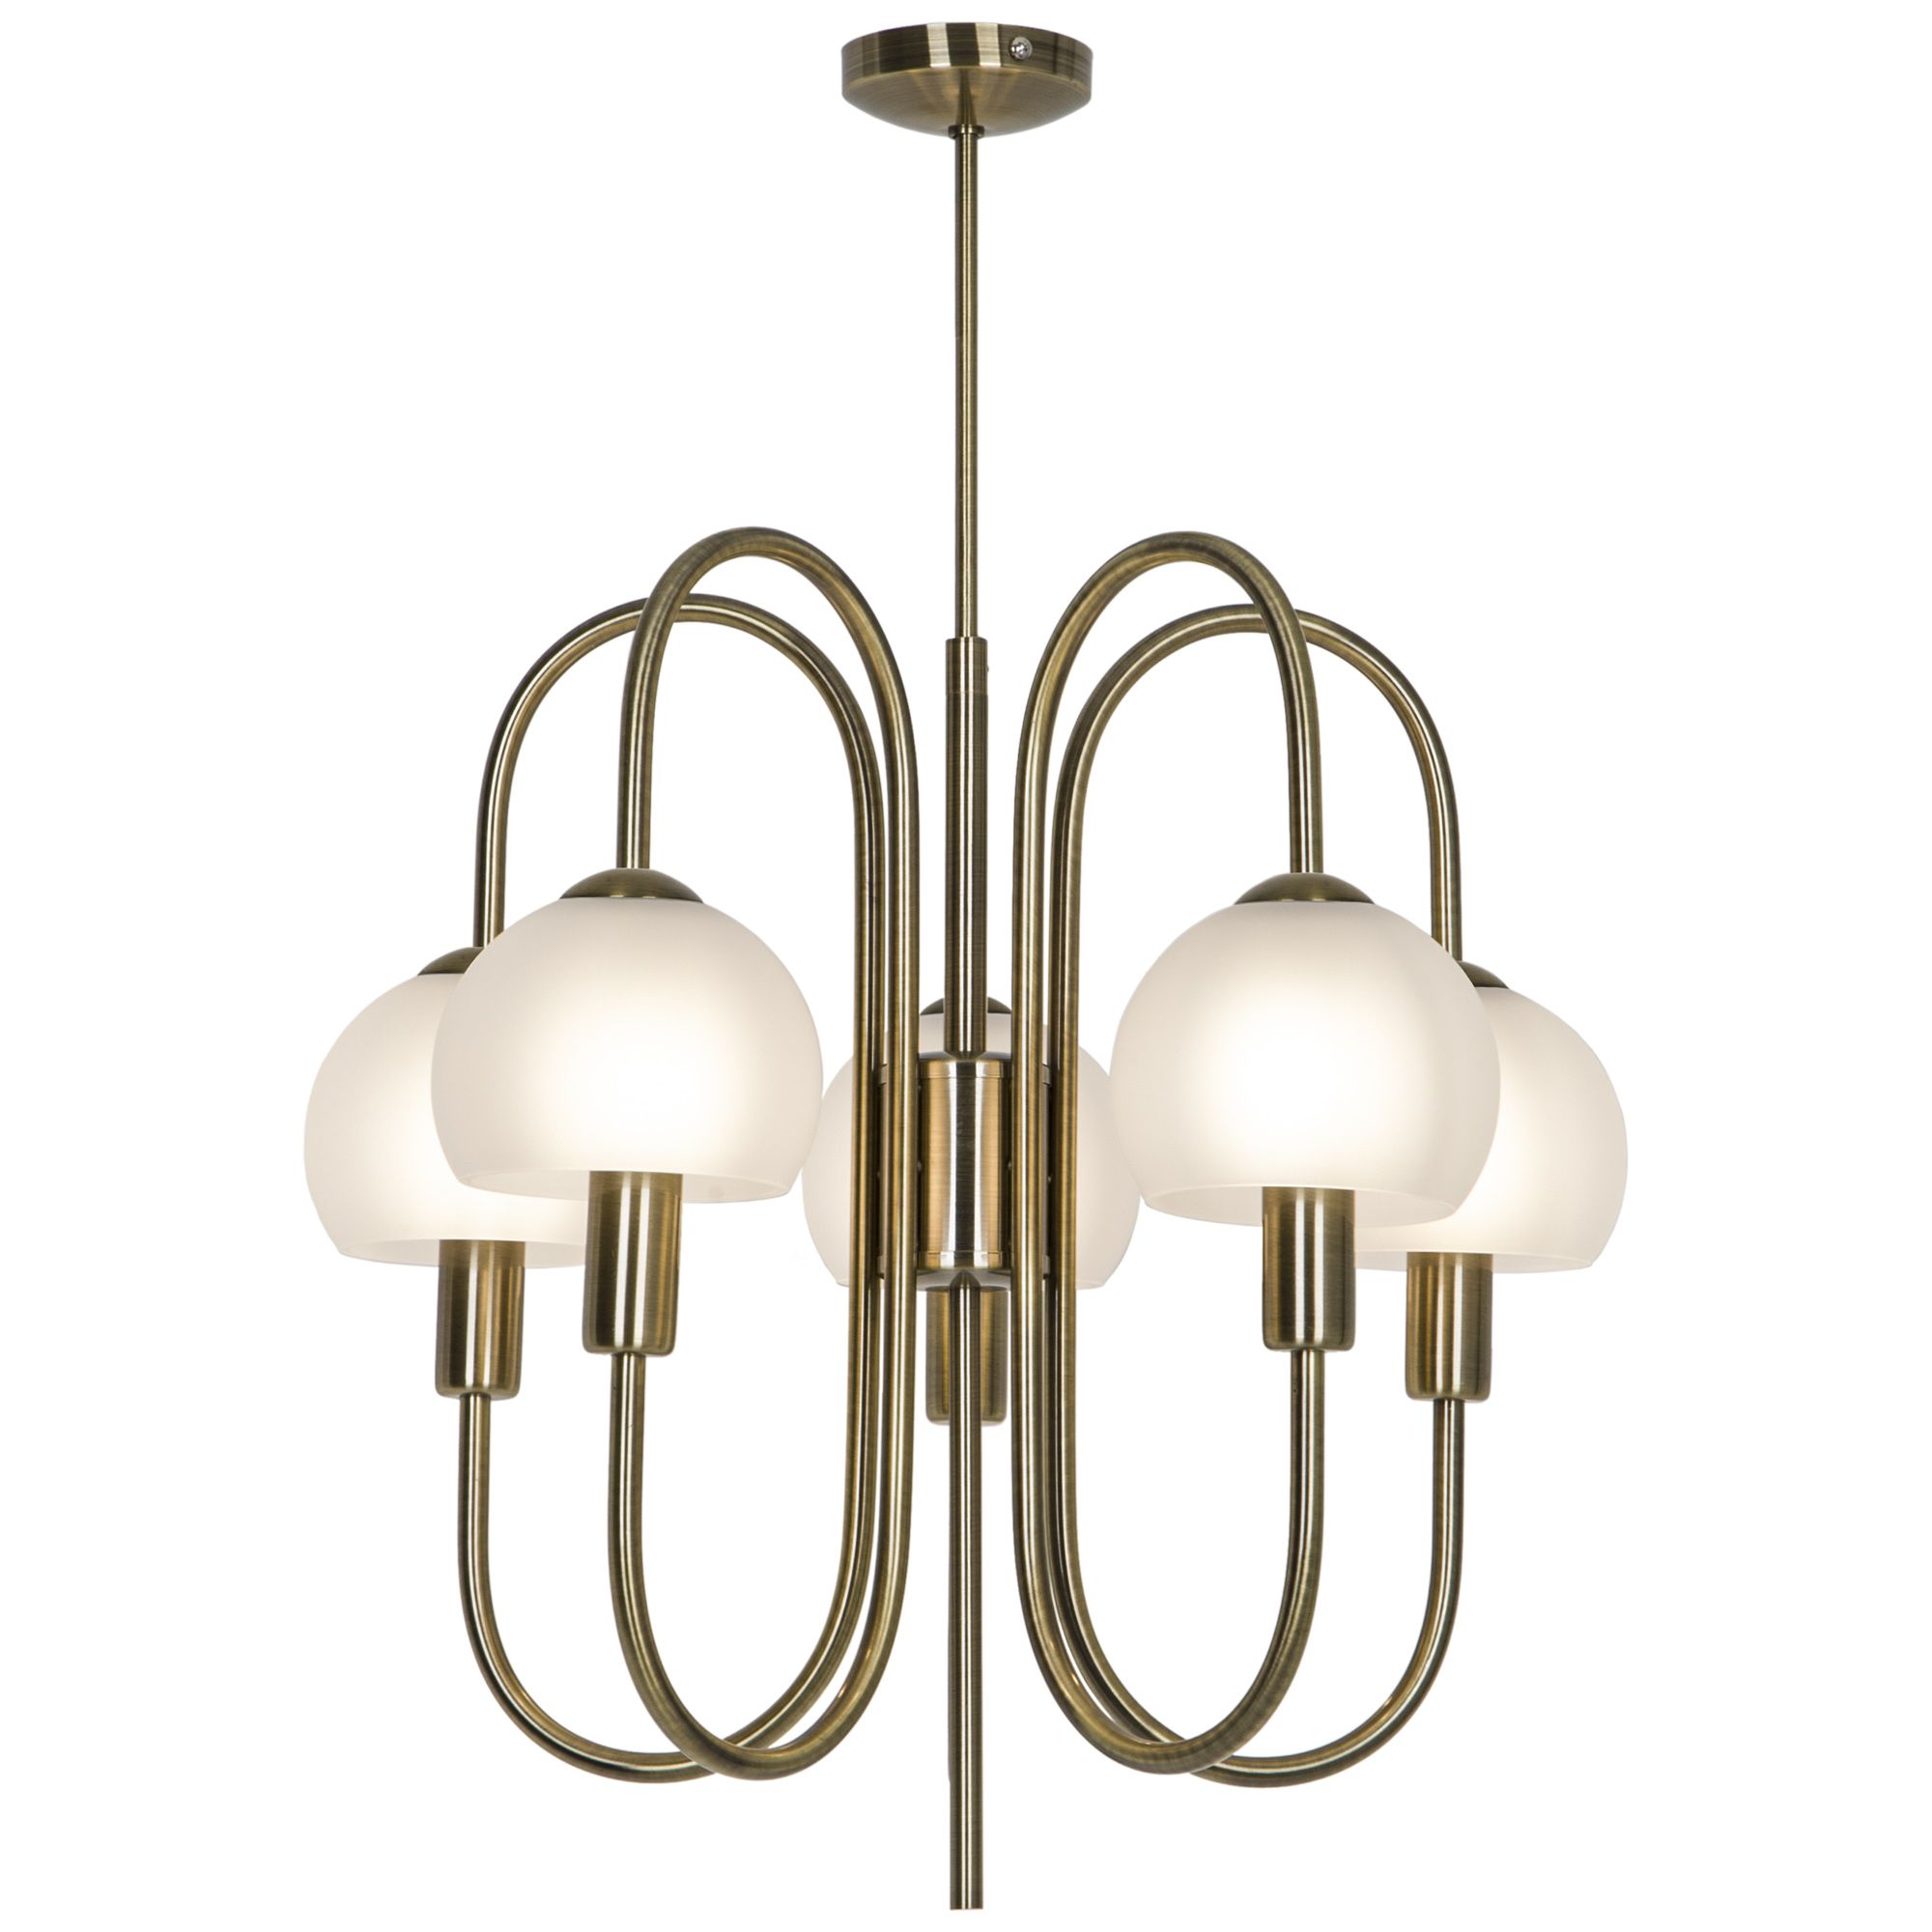 GoodHome Gammont Antique brass effect 5 Lamp Pendant ceiling light, (Dia)500mm